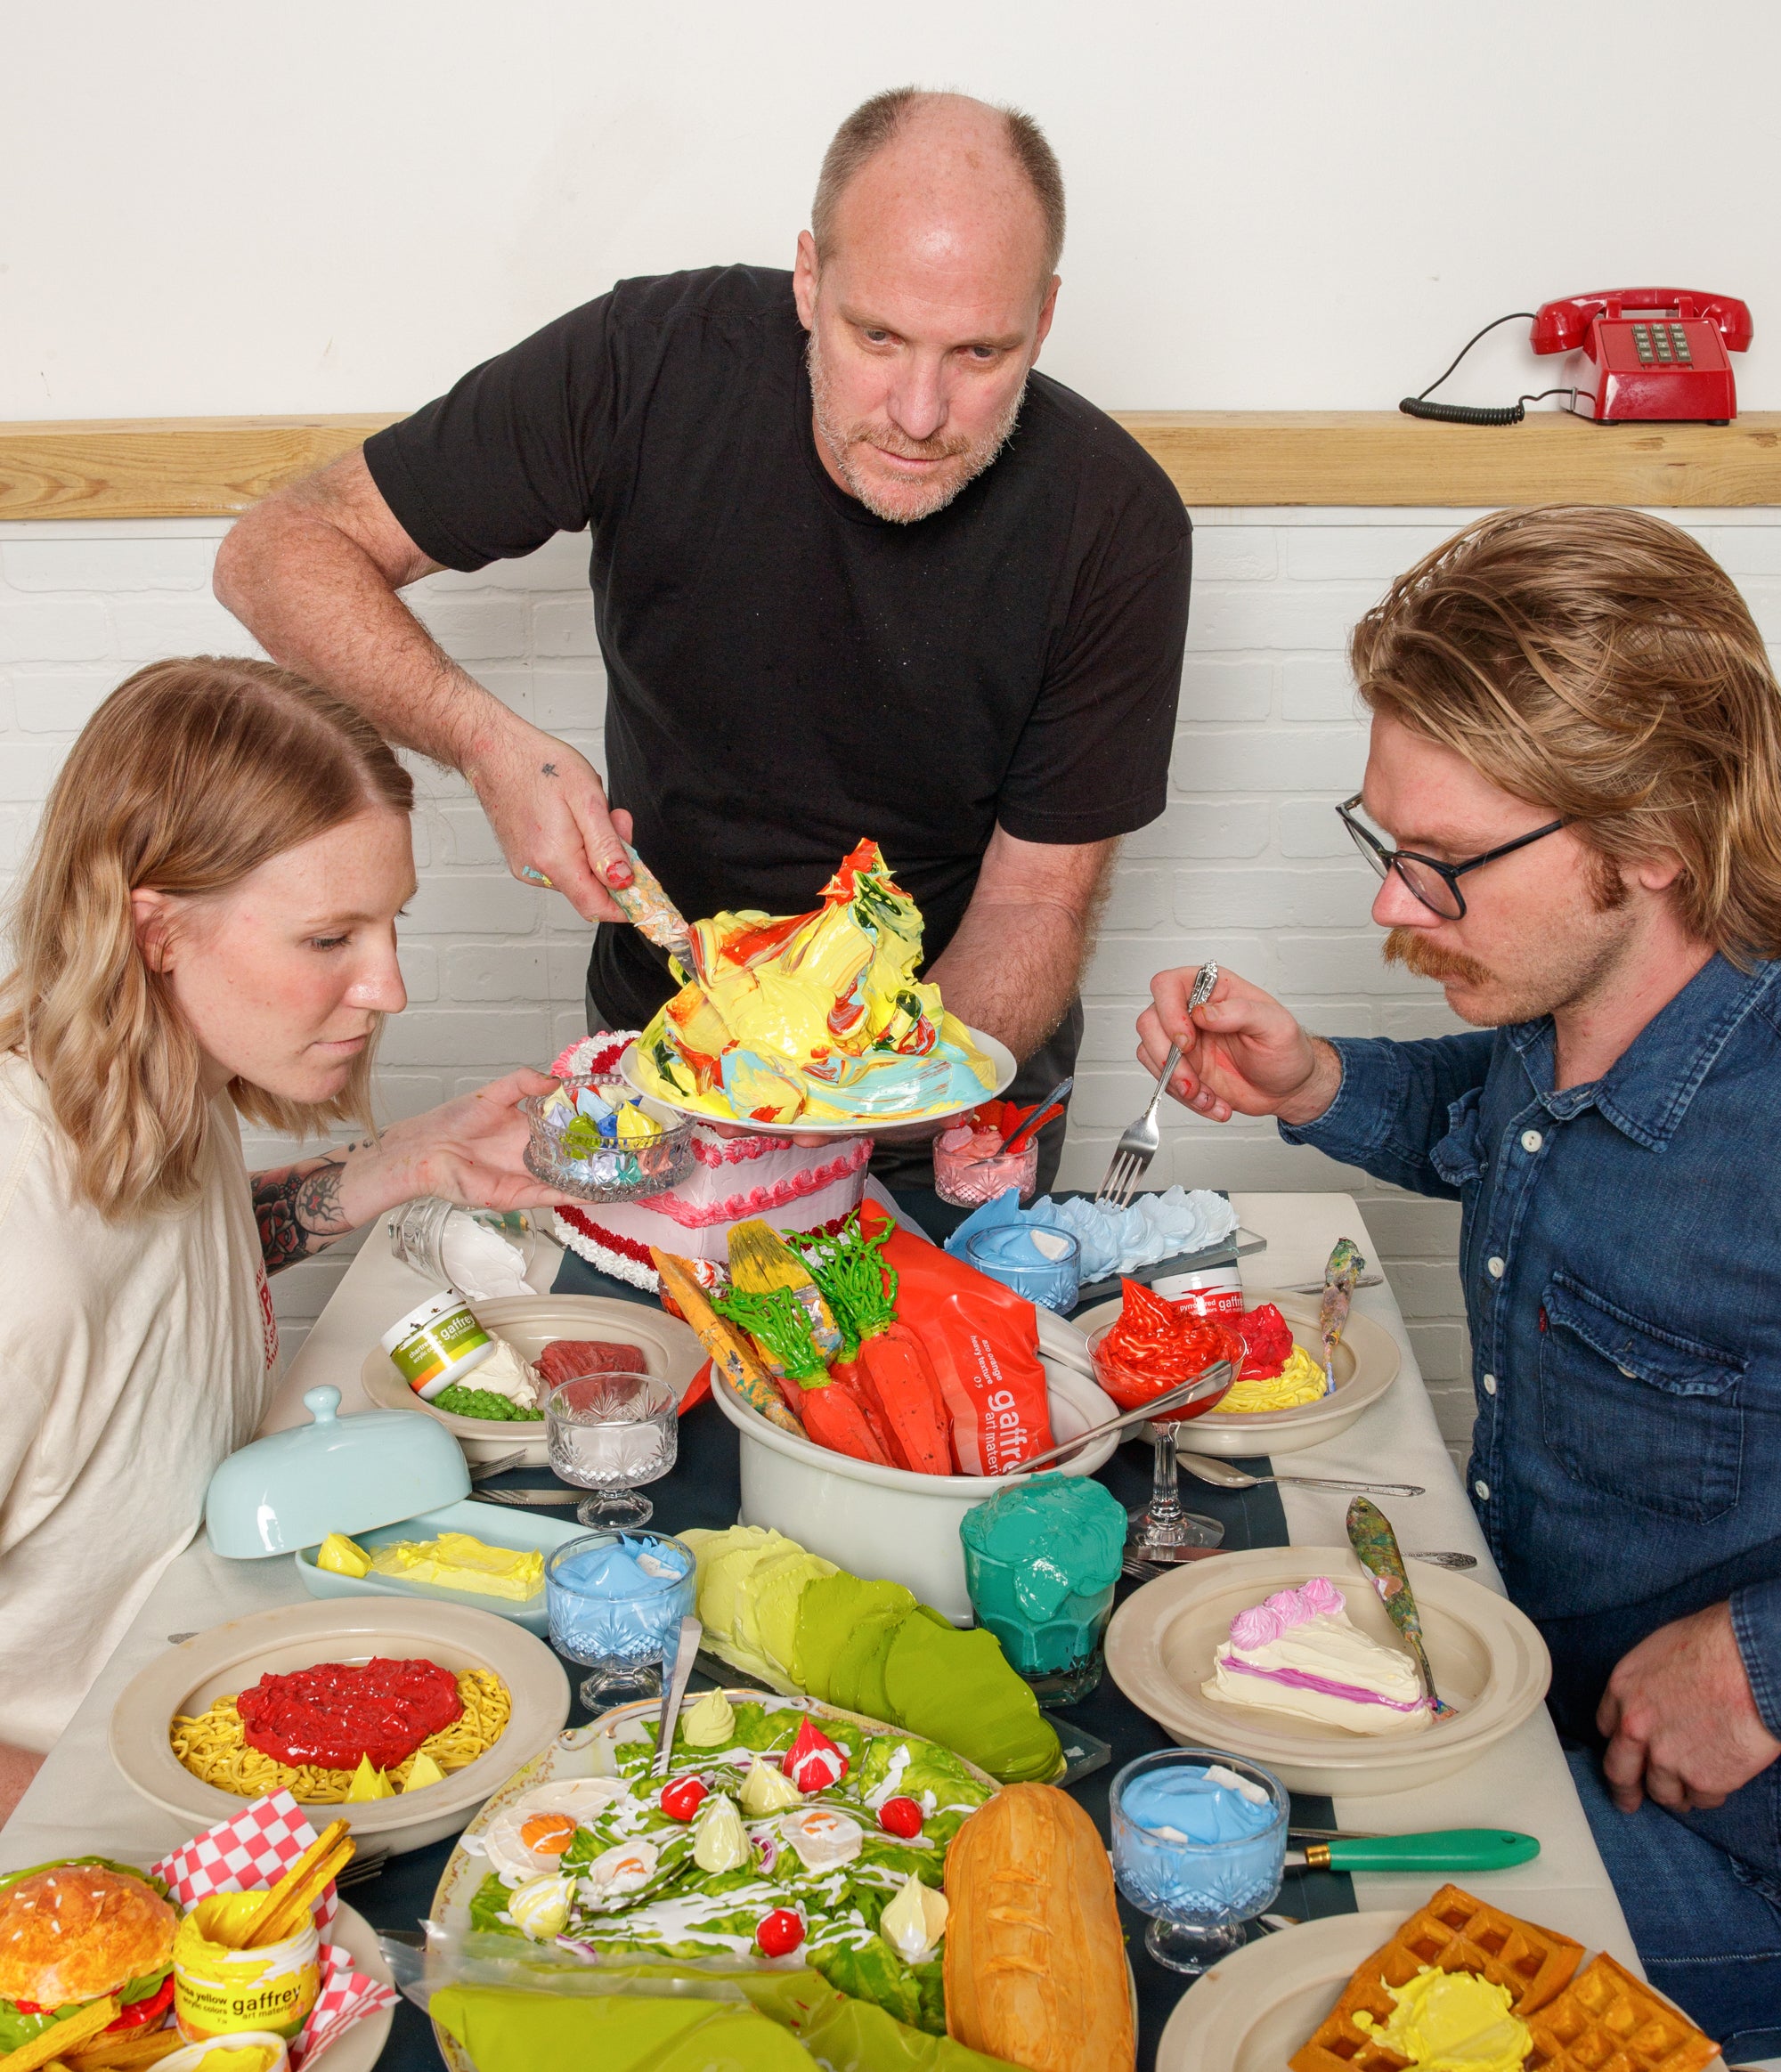 A father serves colorful acrylic paint 'food' sculptures to his adult son and daughter on a long dining table, as part of a whimsical photoshoot by Sean Murphy.